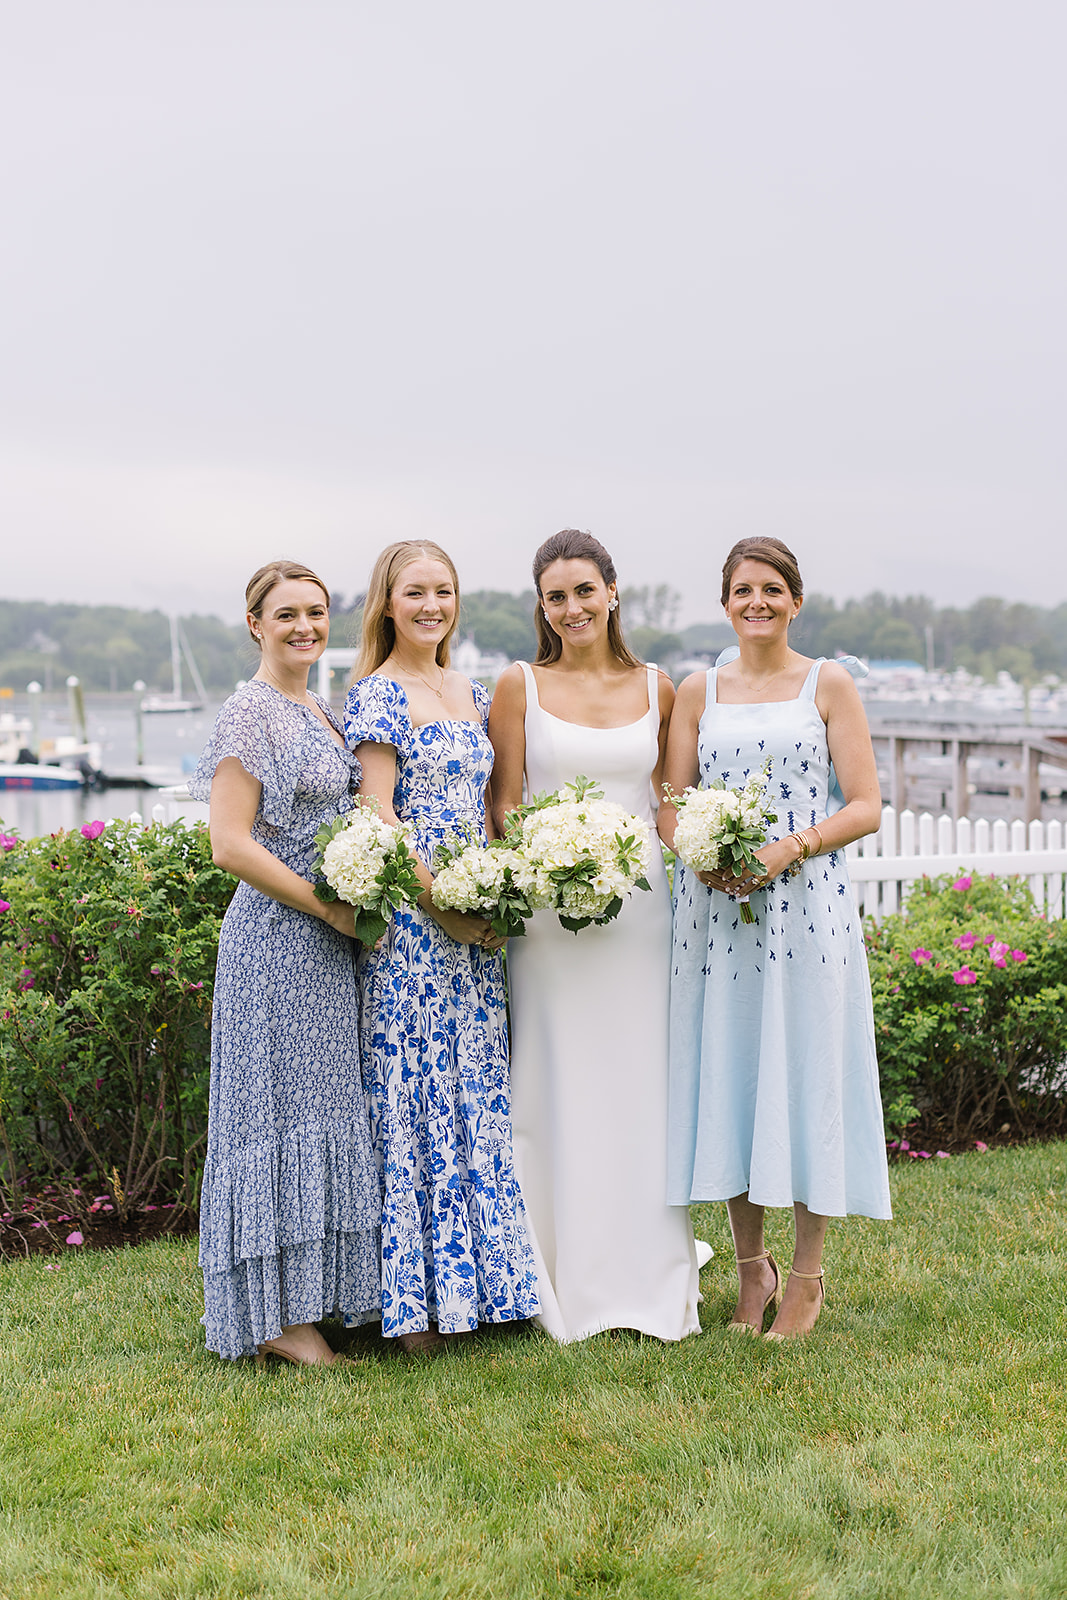 Clare and bridesmaids in mismatched dresses (including Reformation) before ceremony. Hair & Makeup by Le Glam Team.